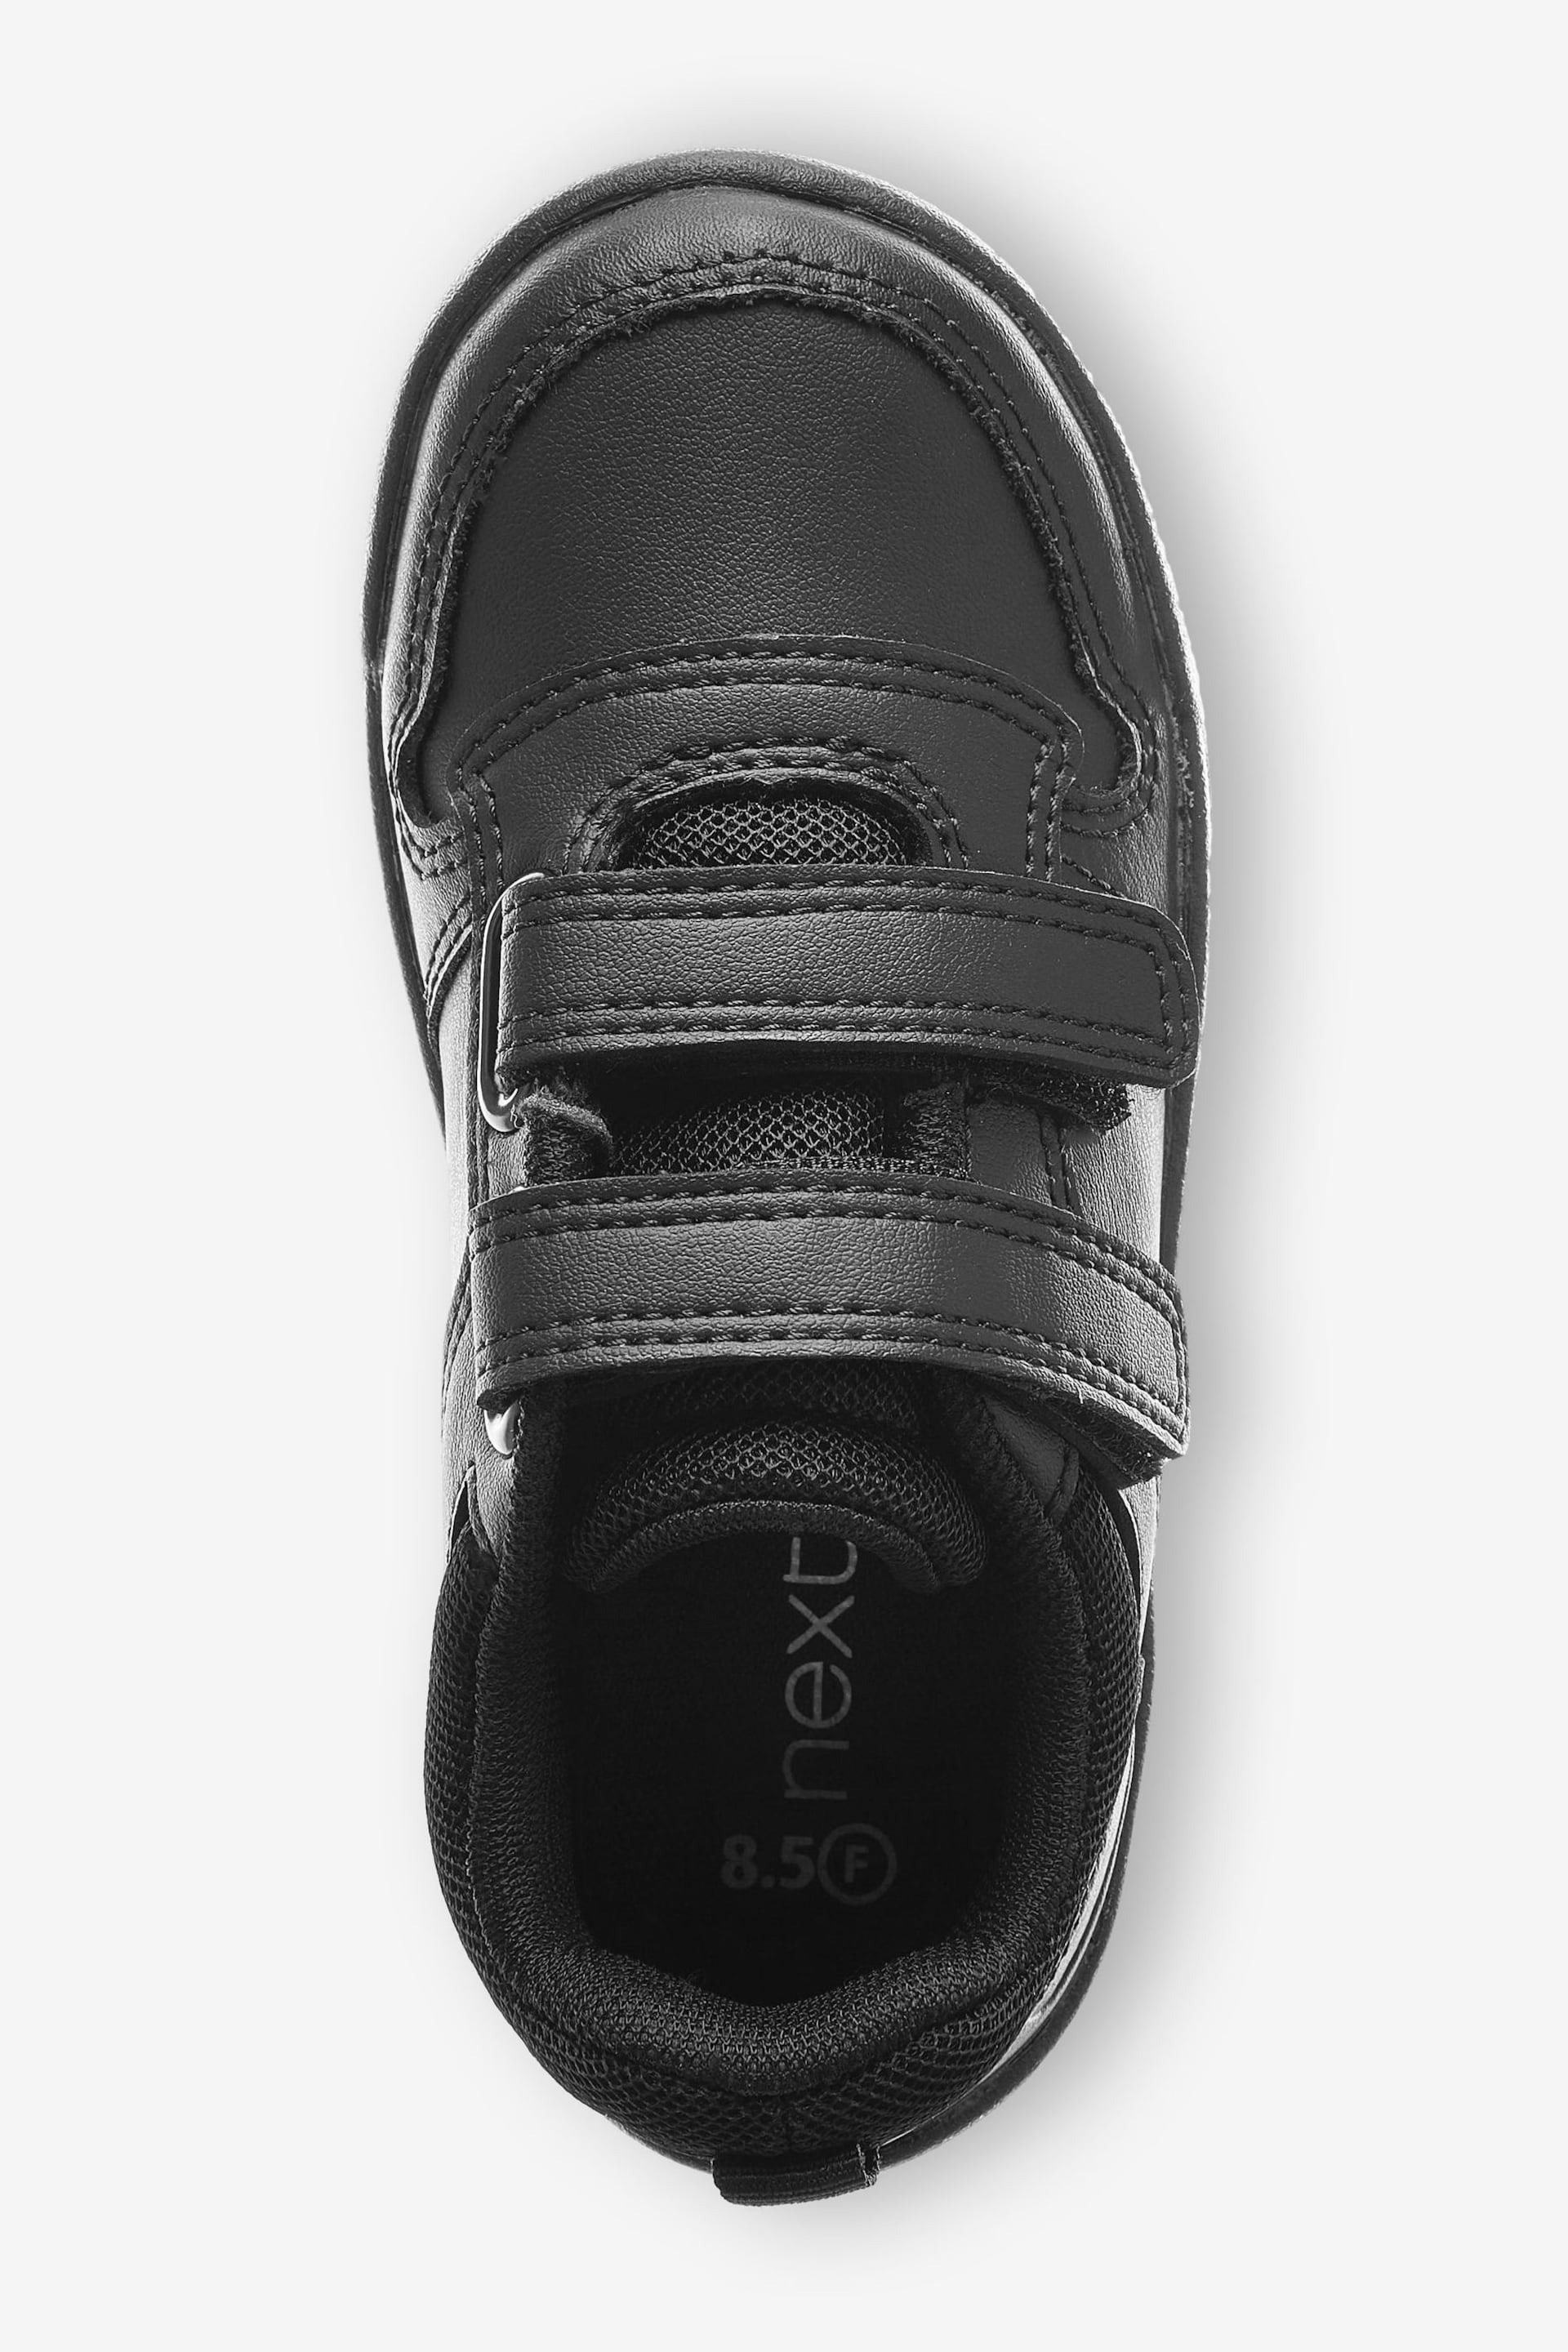 Black Strap Touch Fasten Wide Fit (G) School Trainers - Image 5 of 10